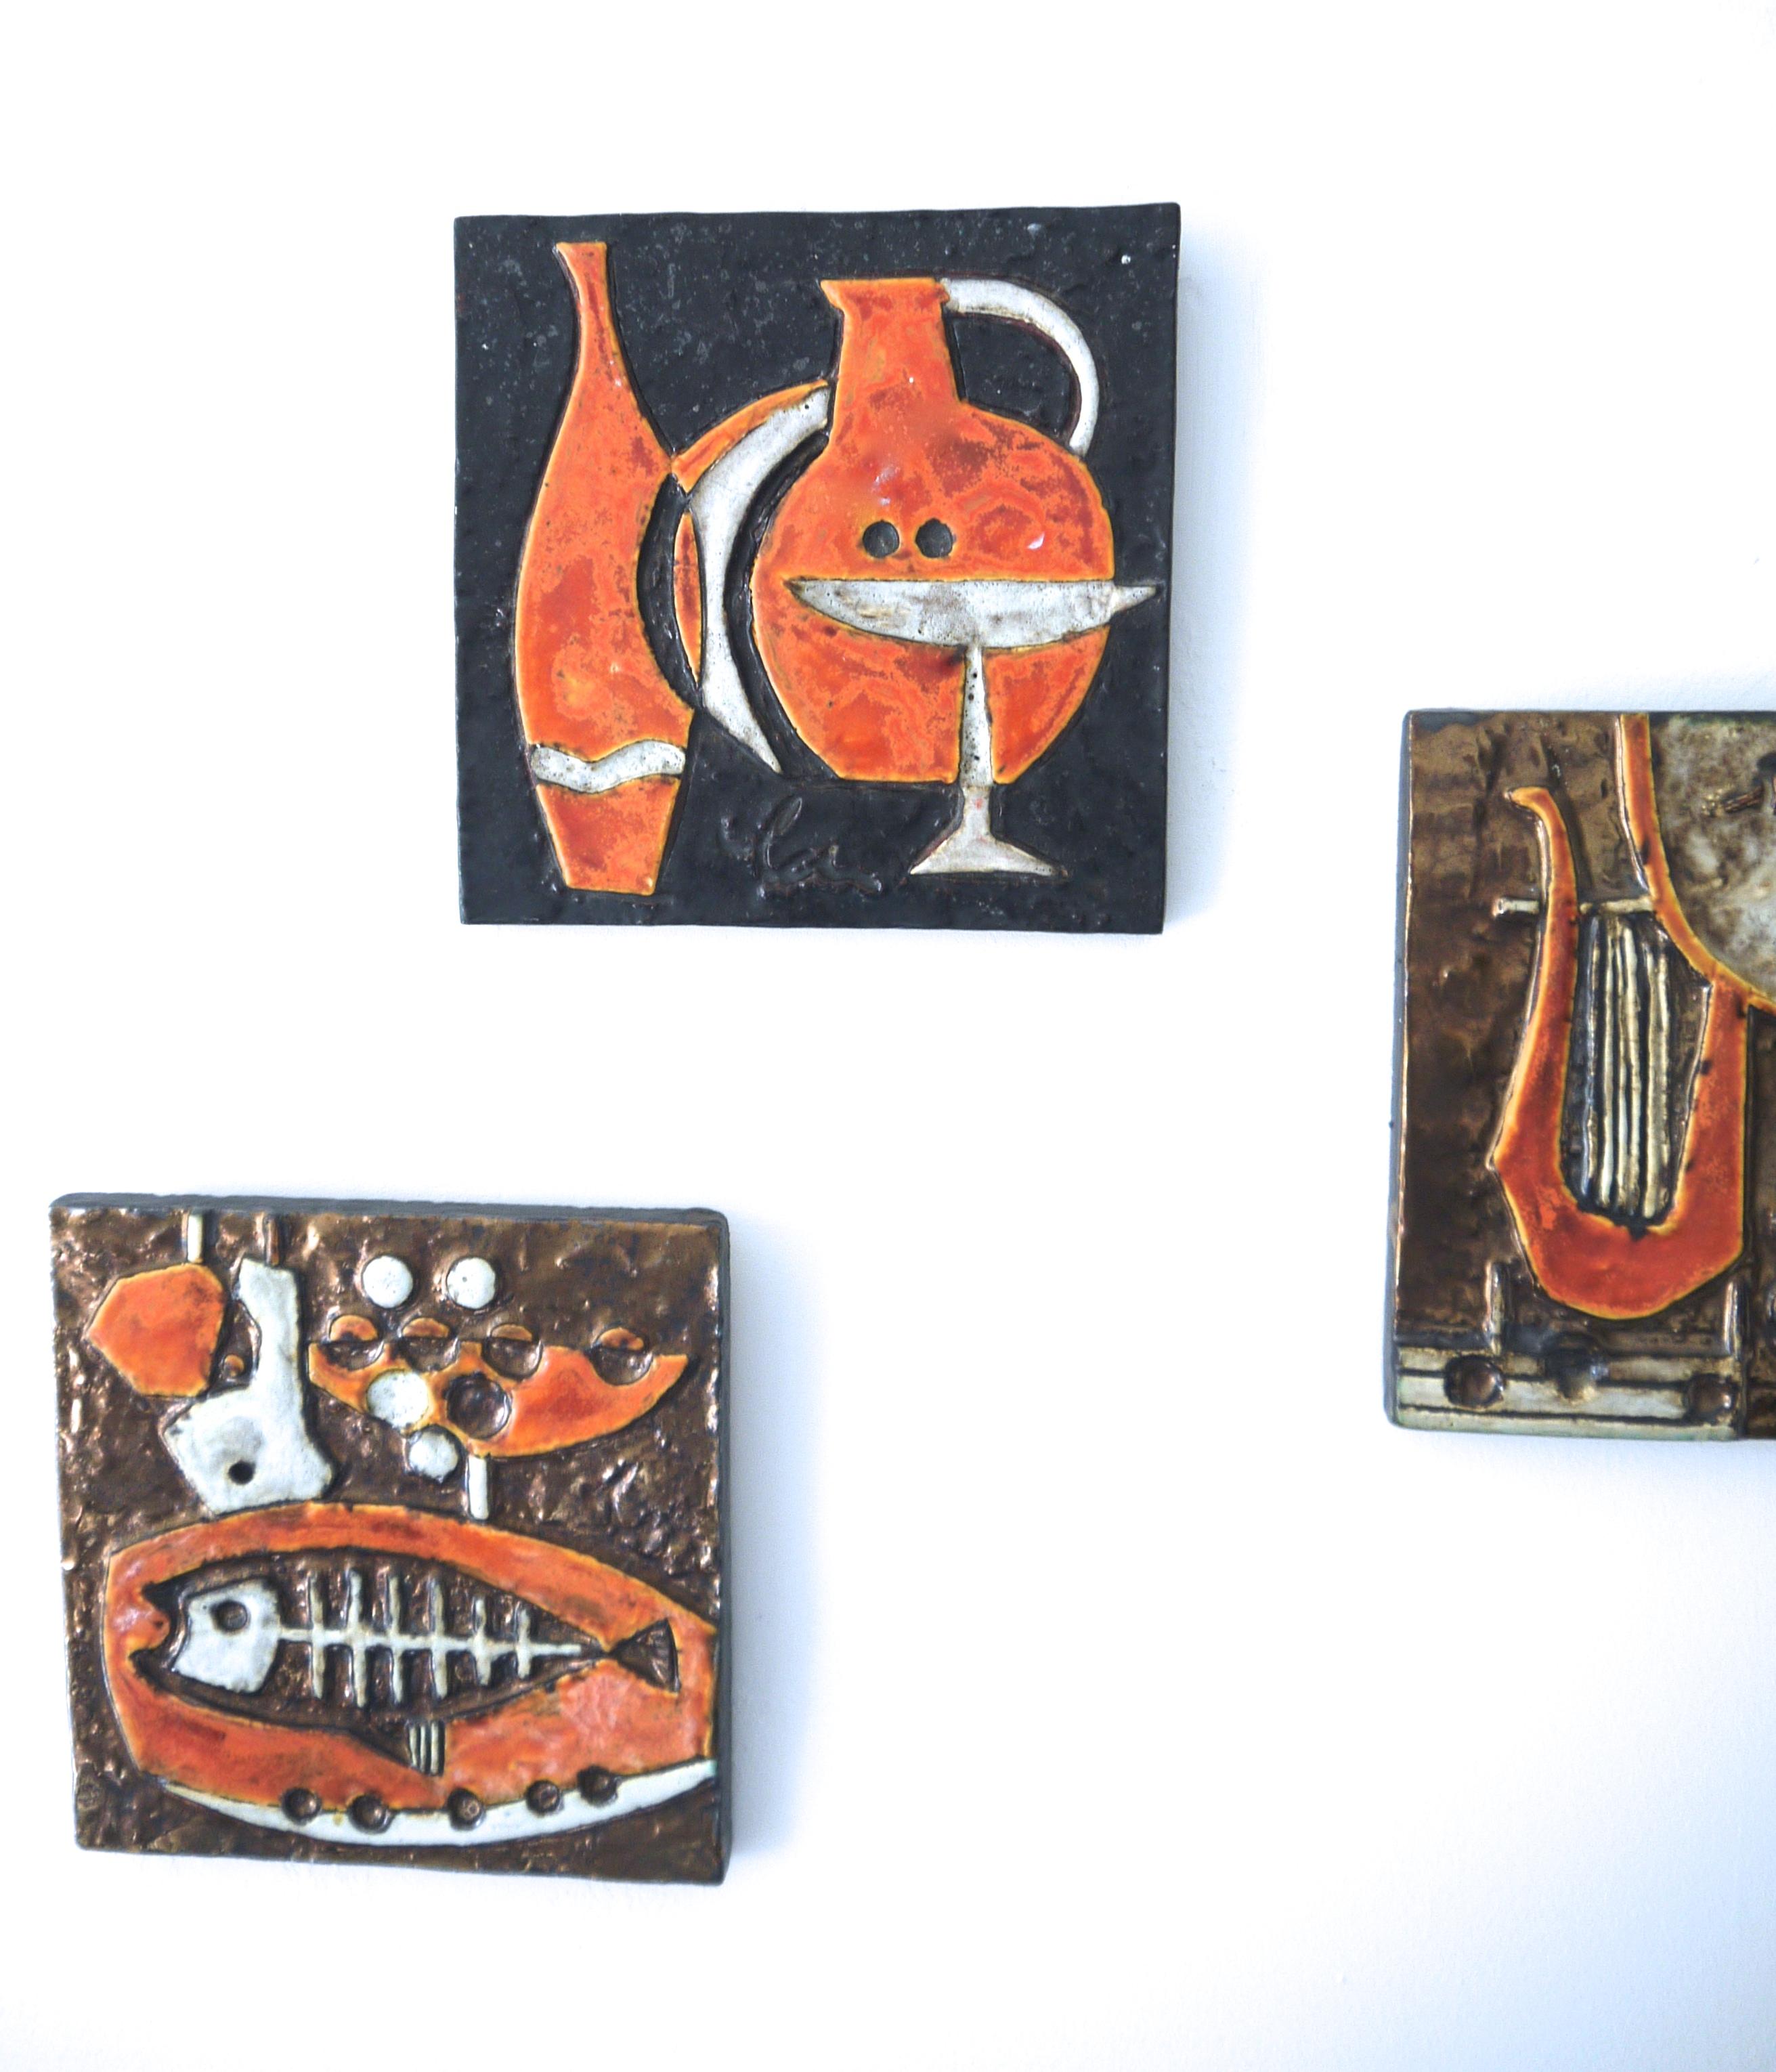 Brutalist Modernist Ceramic Wall Plaques, Set of Three by Helmut Schaffenacker Late 1950s For Sale